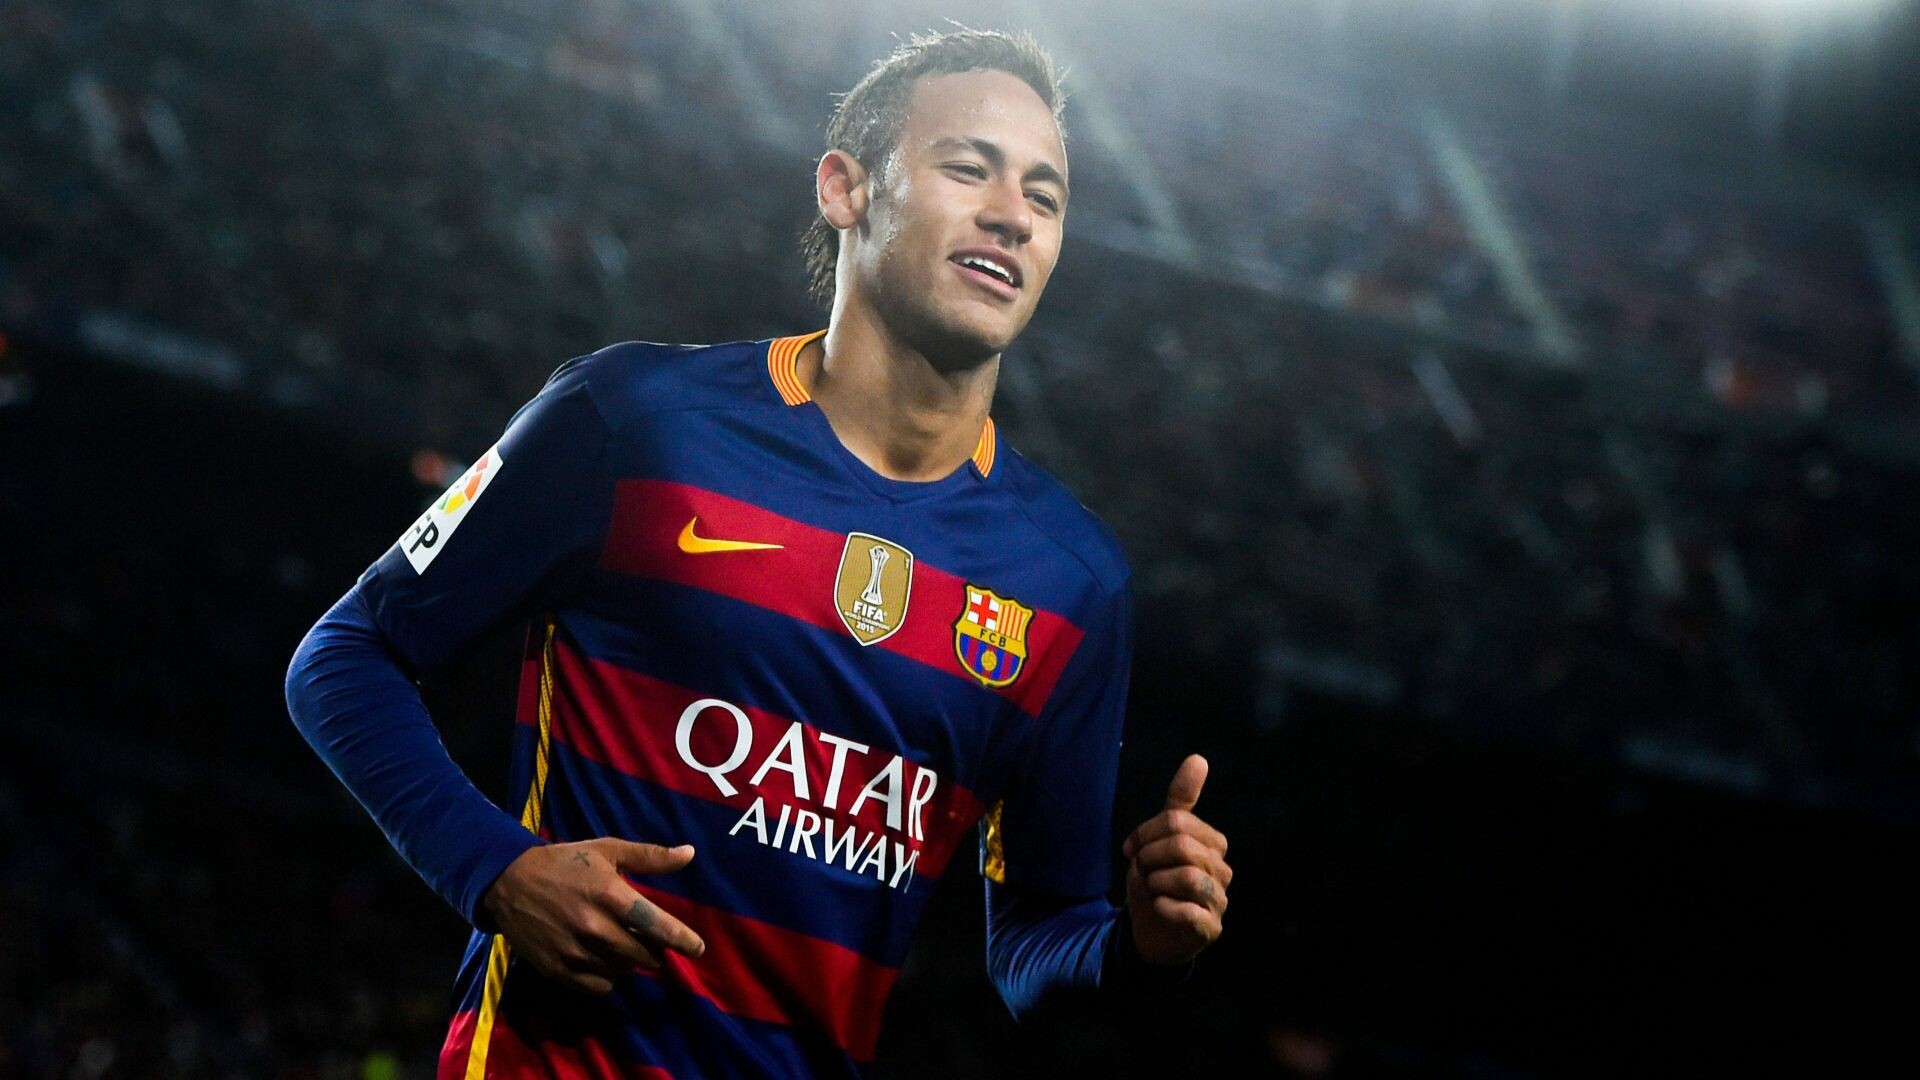 Neymar: He scored his 100th goal for Barcelona in his 177th appearance for the club on 2 April 2017. 1920x1080 Full HD Wallpaper.